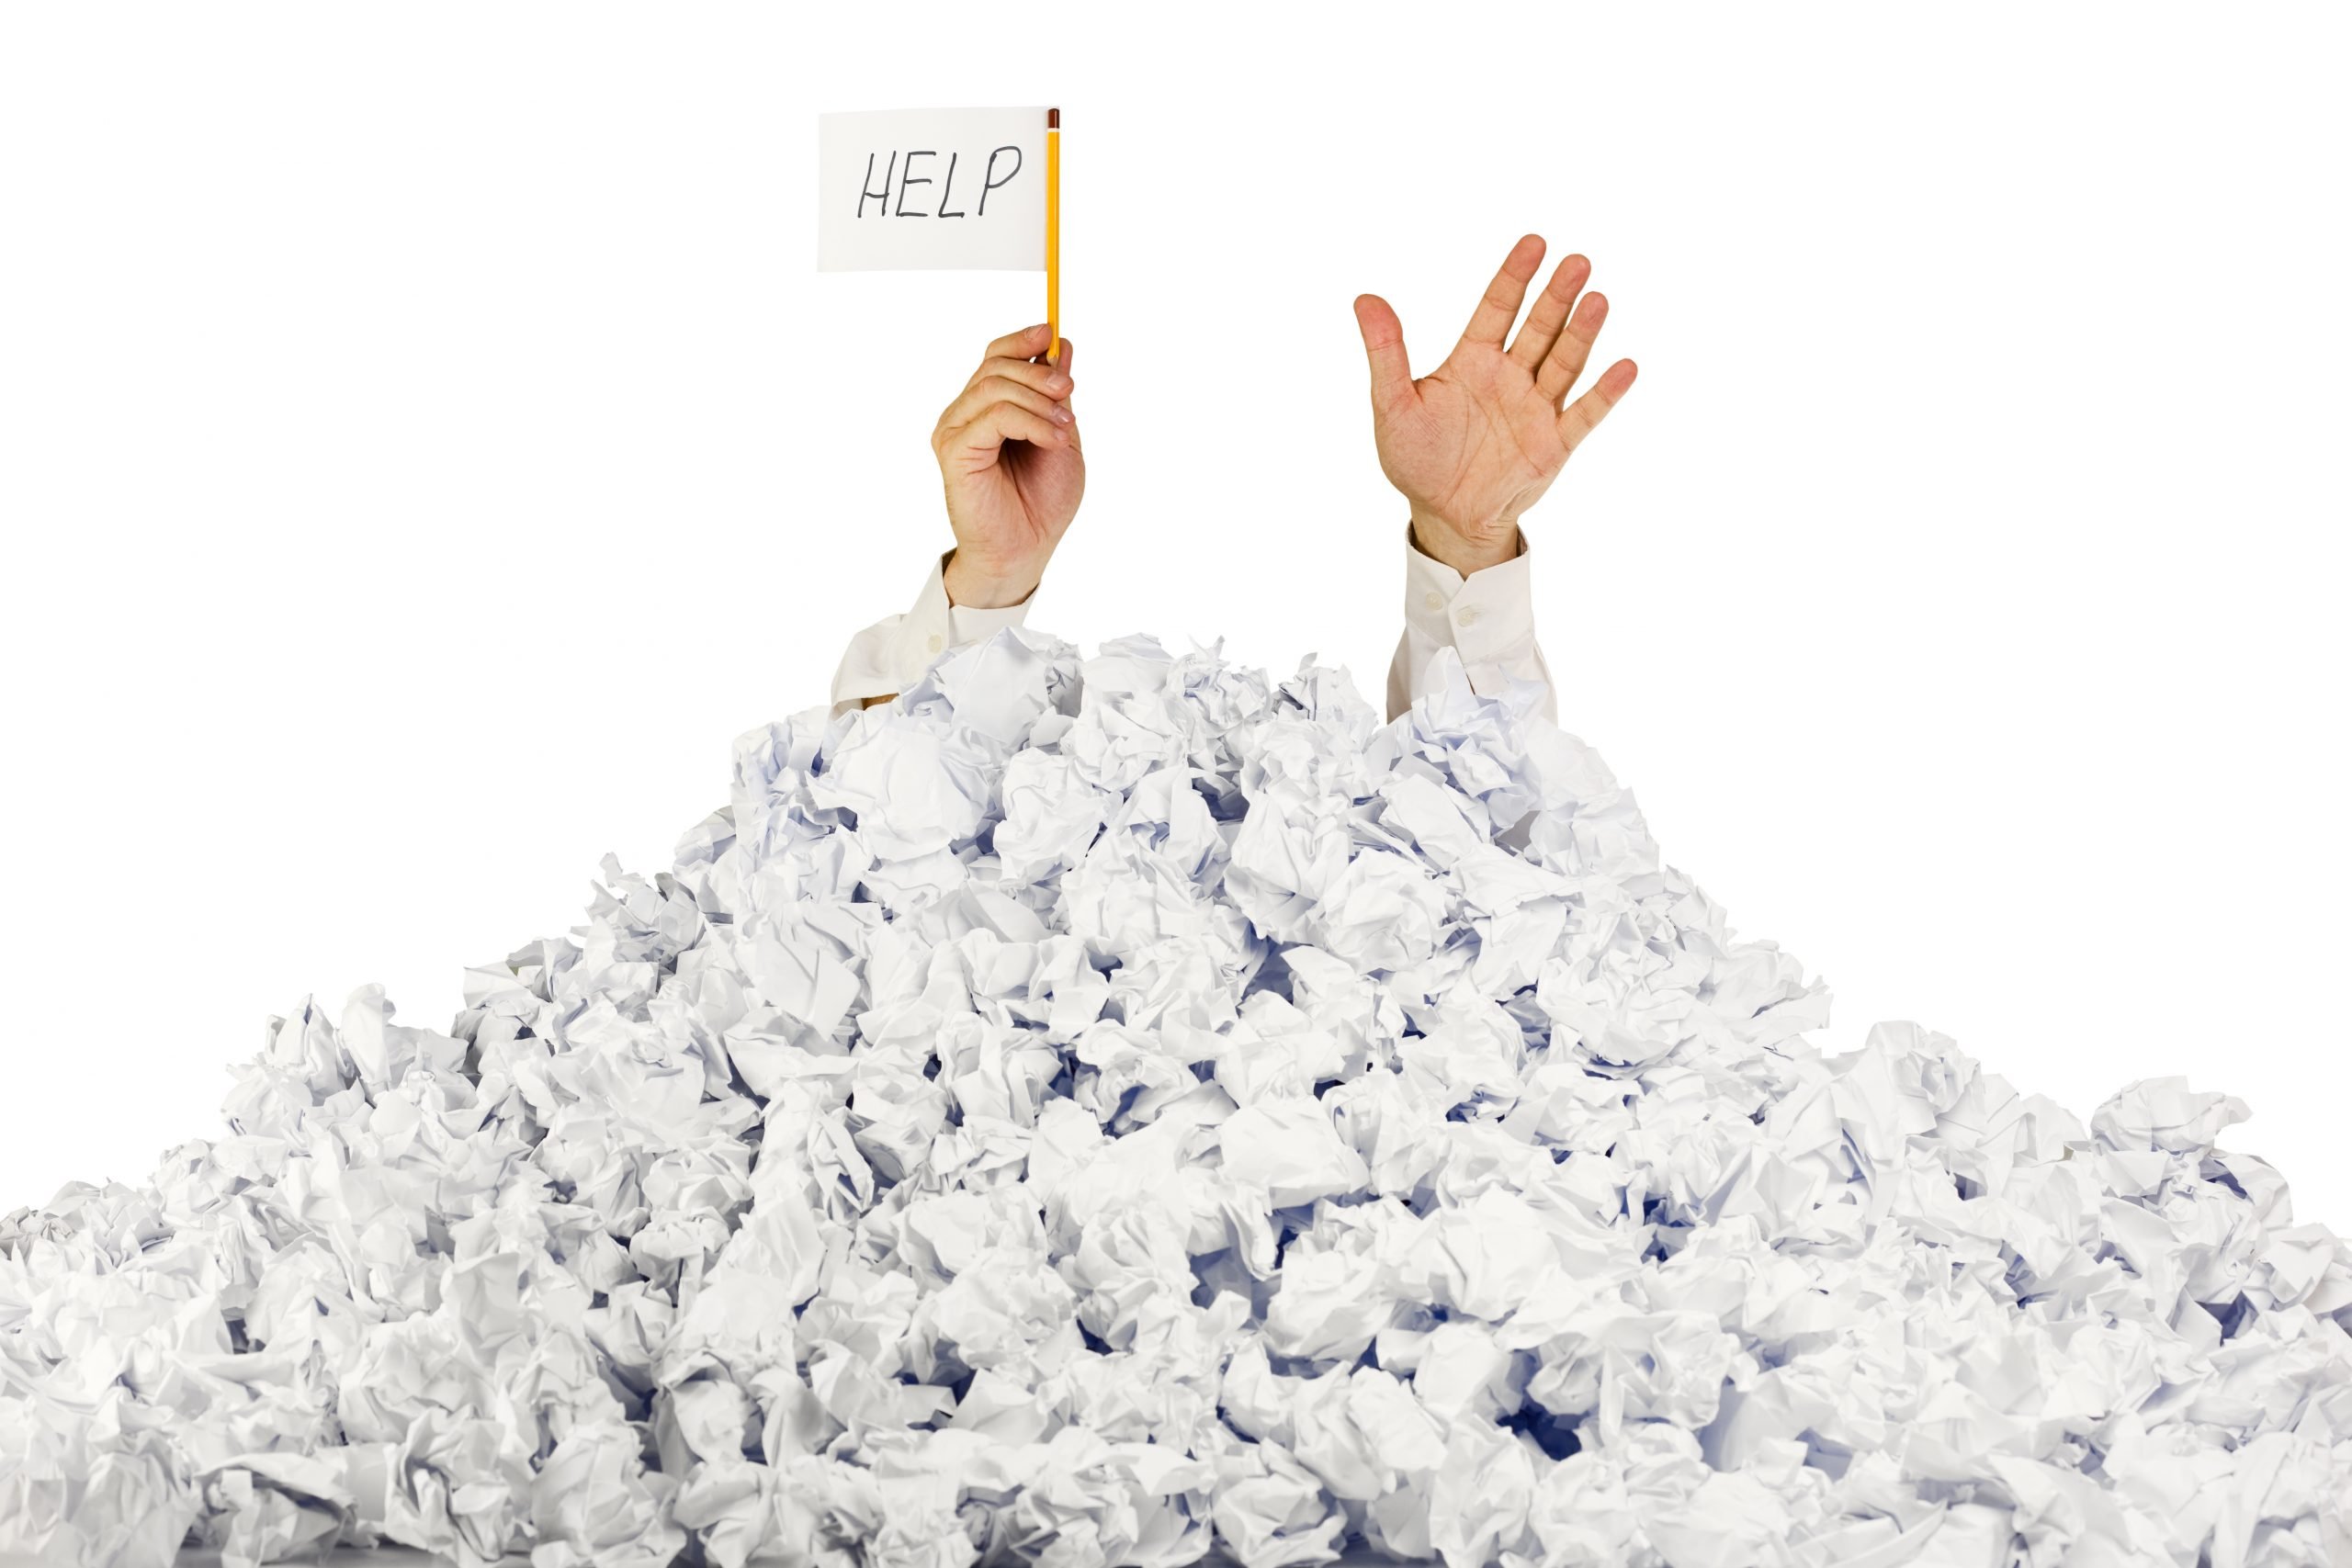 Person under crumpled pile of papers with help sign